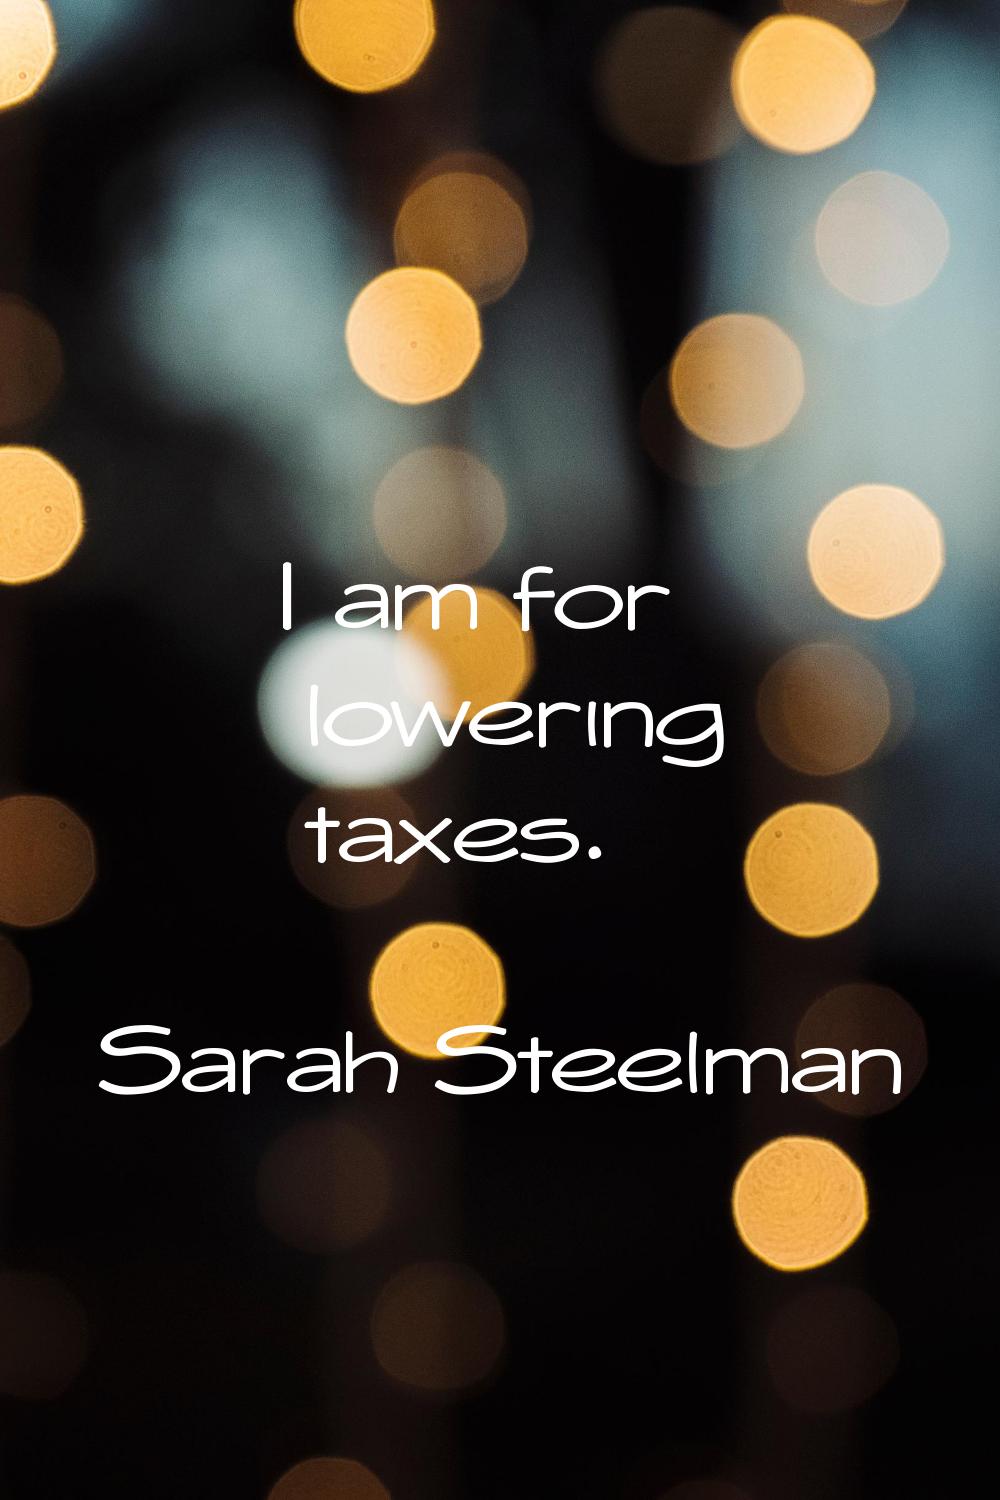 I am for lowering taxes.